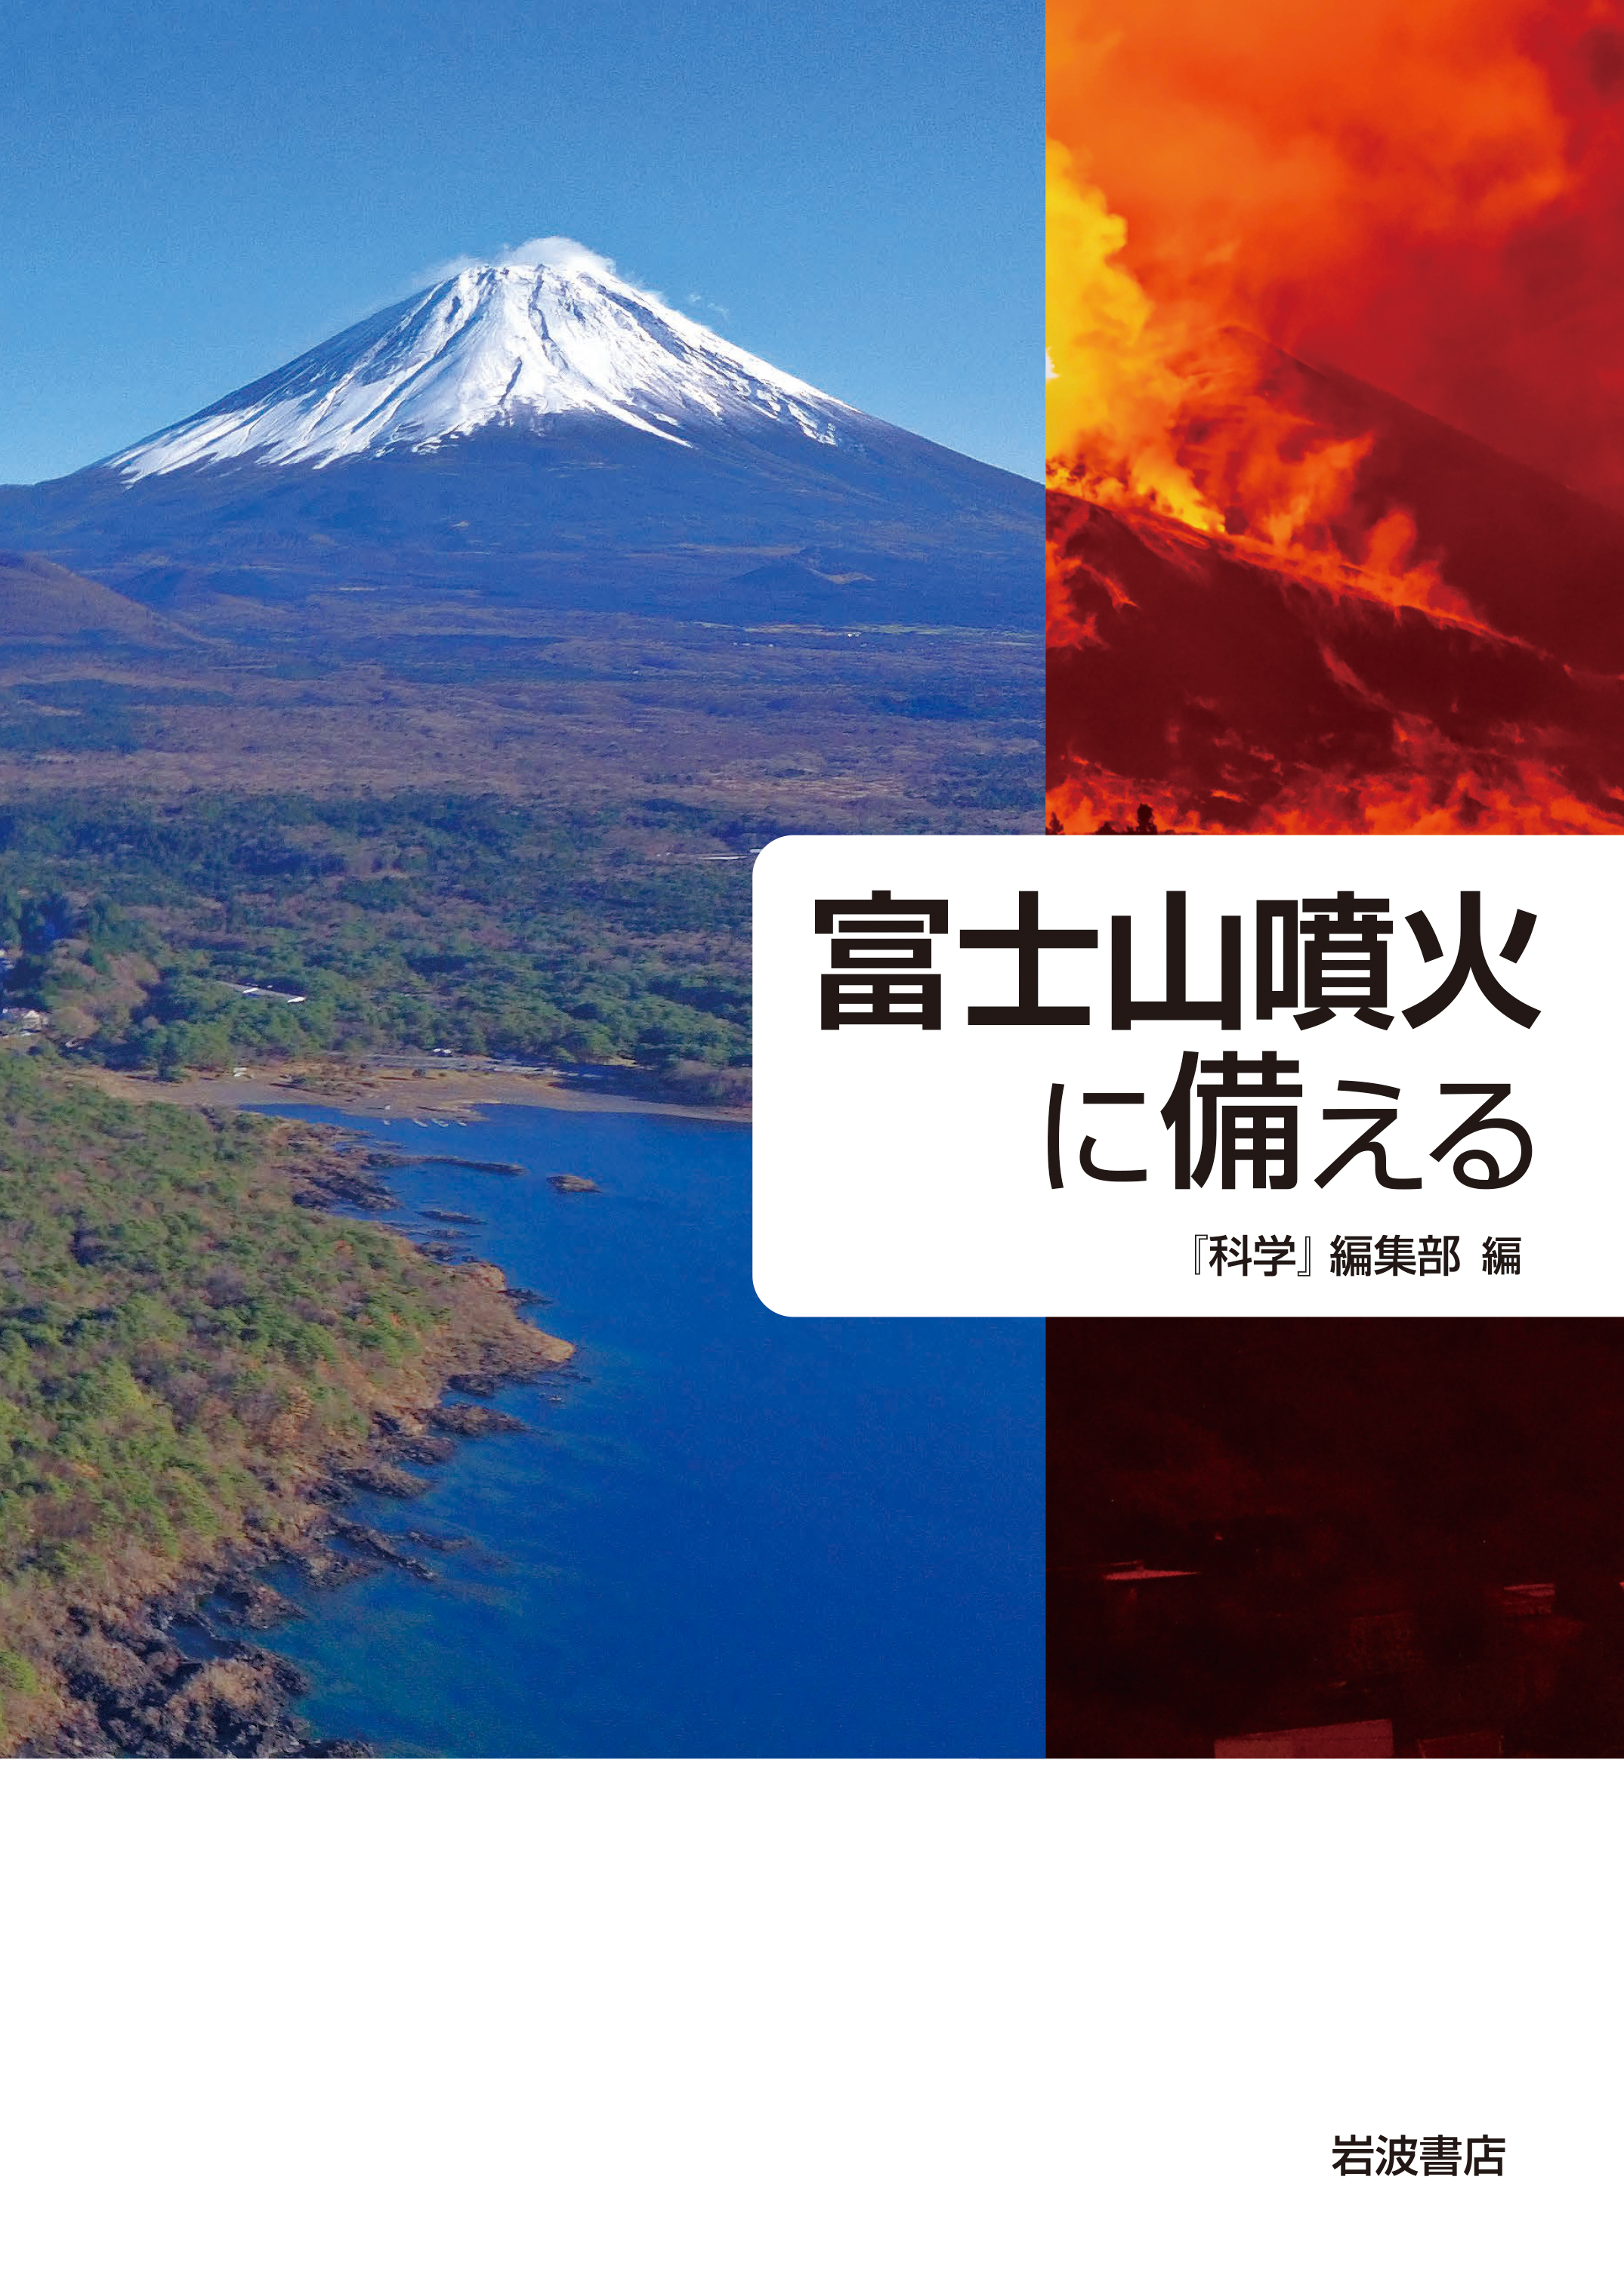 pictures of Mt. Fuji and eruption